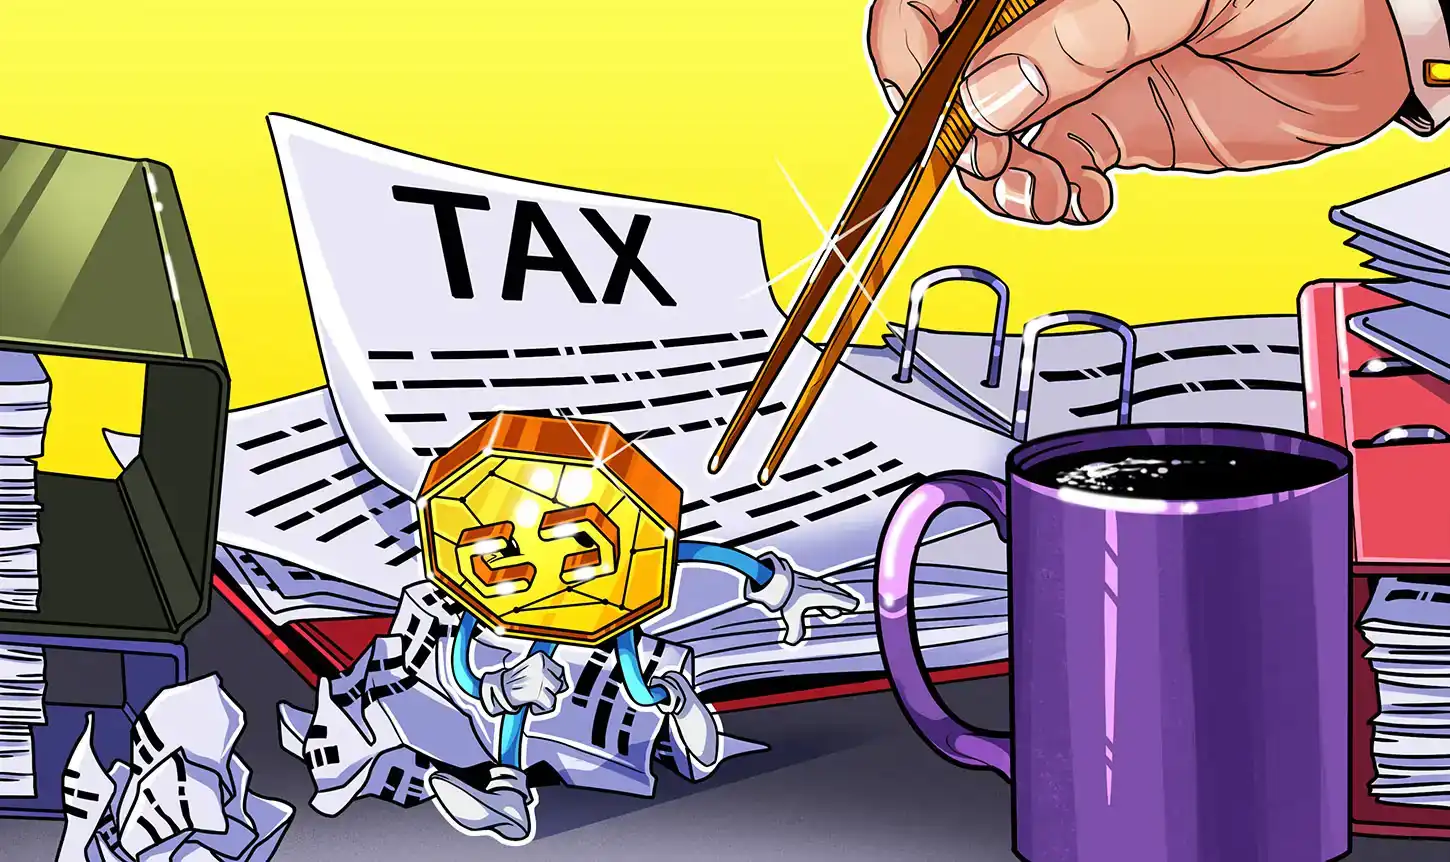 IRS Appoints Crypto Tax Experts, Emphasizes Reporting Digital Assets